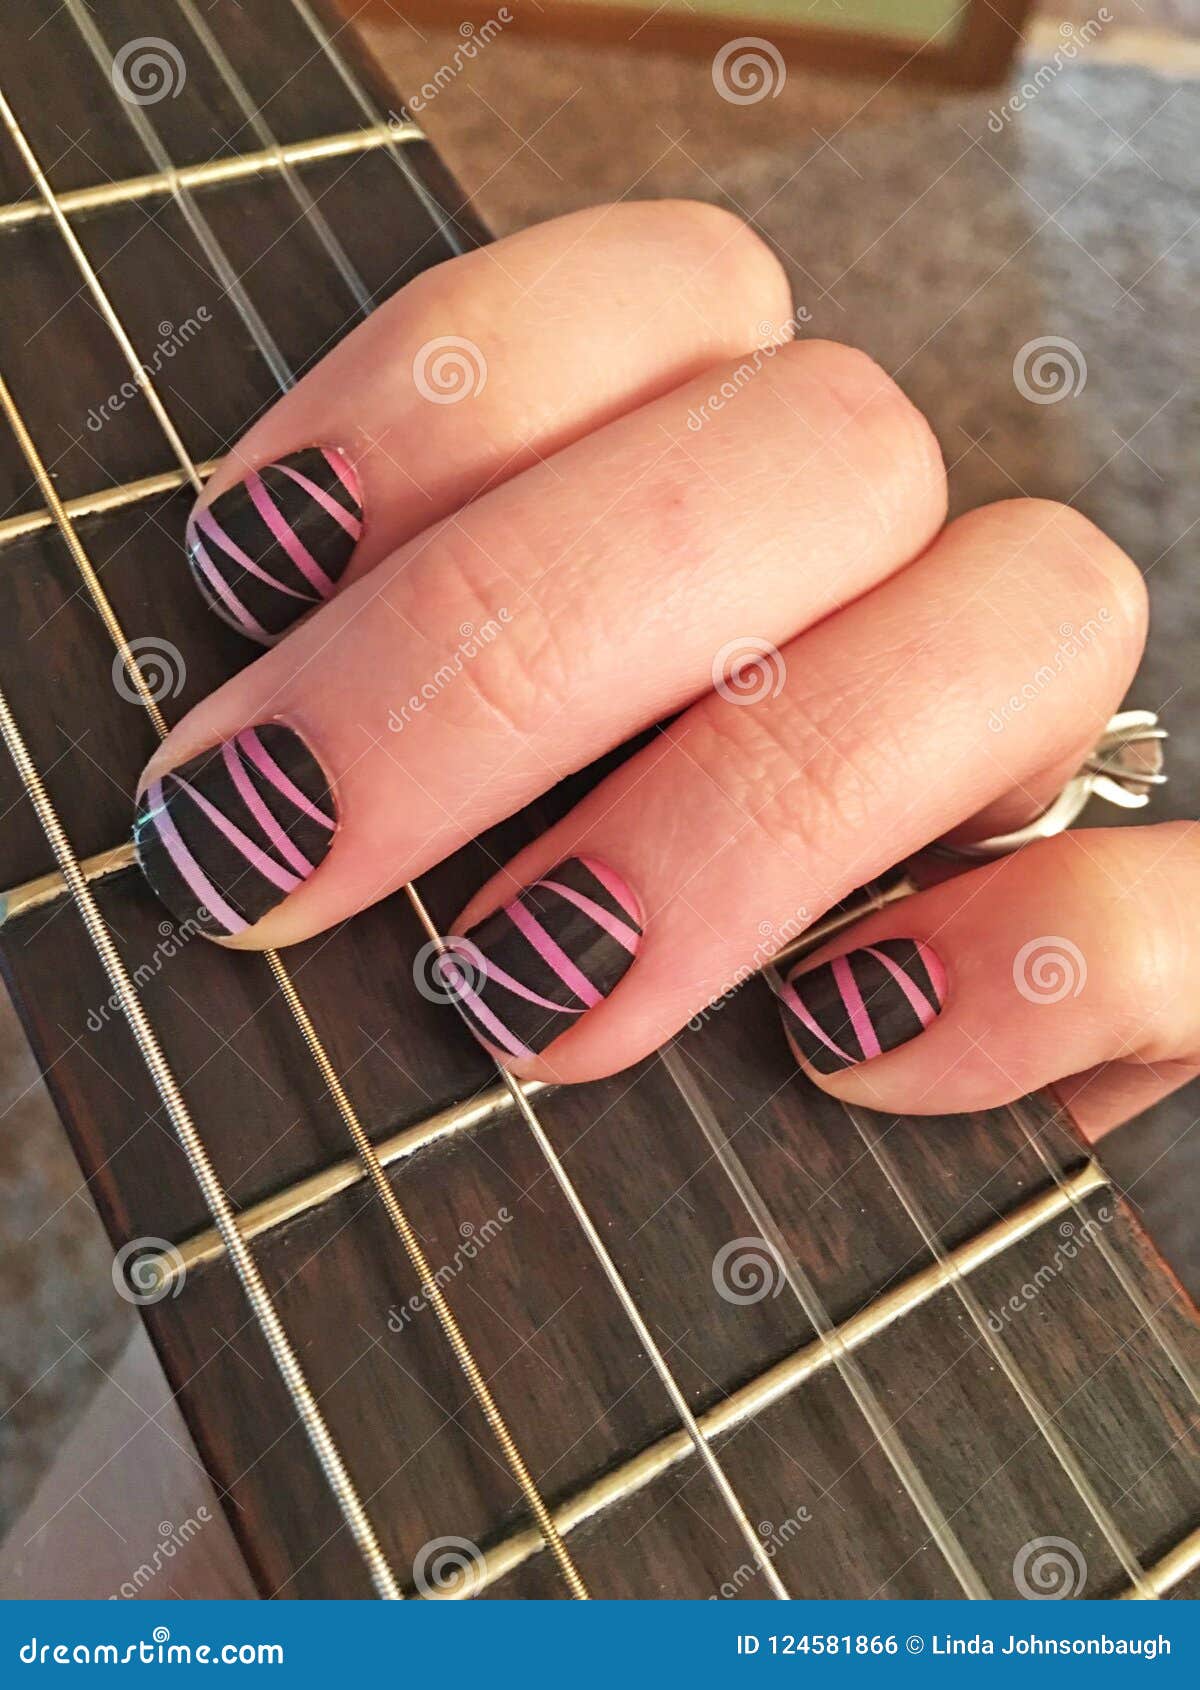 Can You Play Guitar with Acrylic Nails? - Here's the Truth!